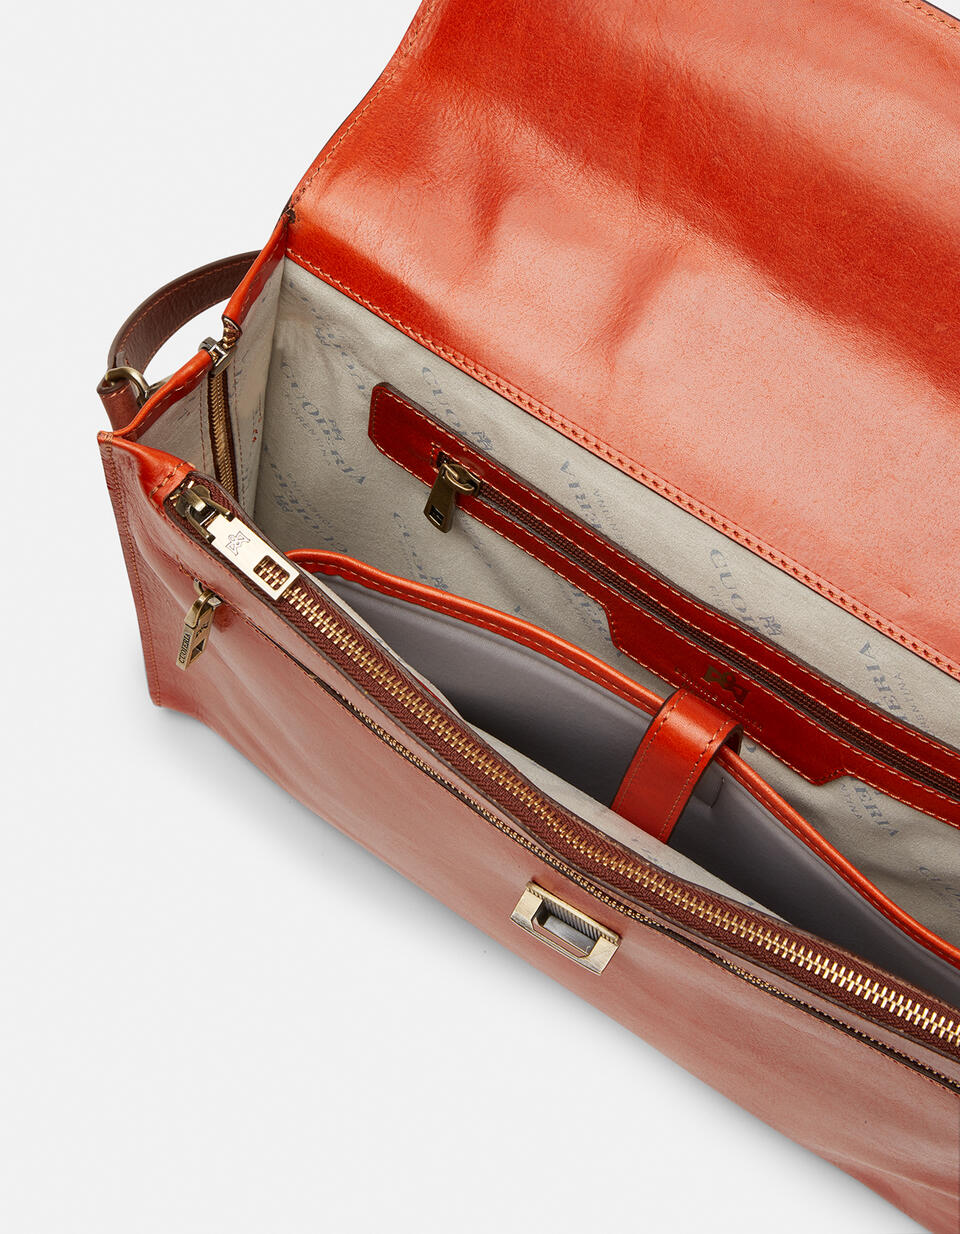 Warm and Colour leather briefcase with side zips - Briefcases and Laptop Bags | Briefcases  - Briefcases and Laptop Bags | BriefcasesCuoieria Fiorentina